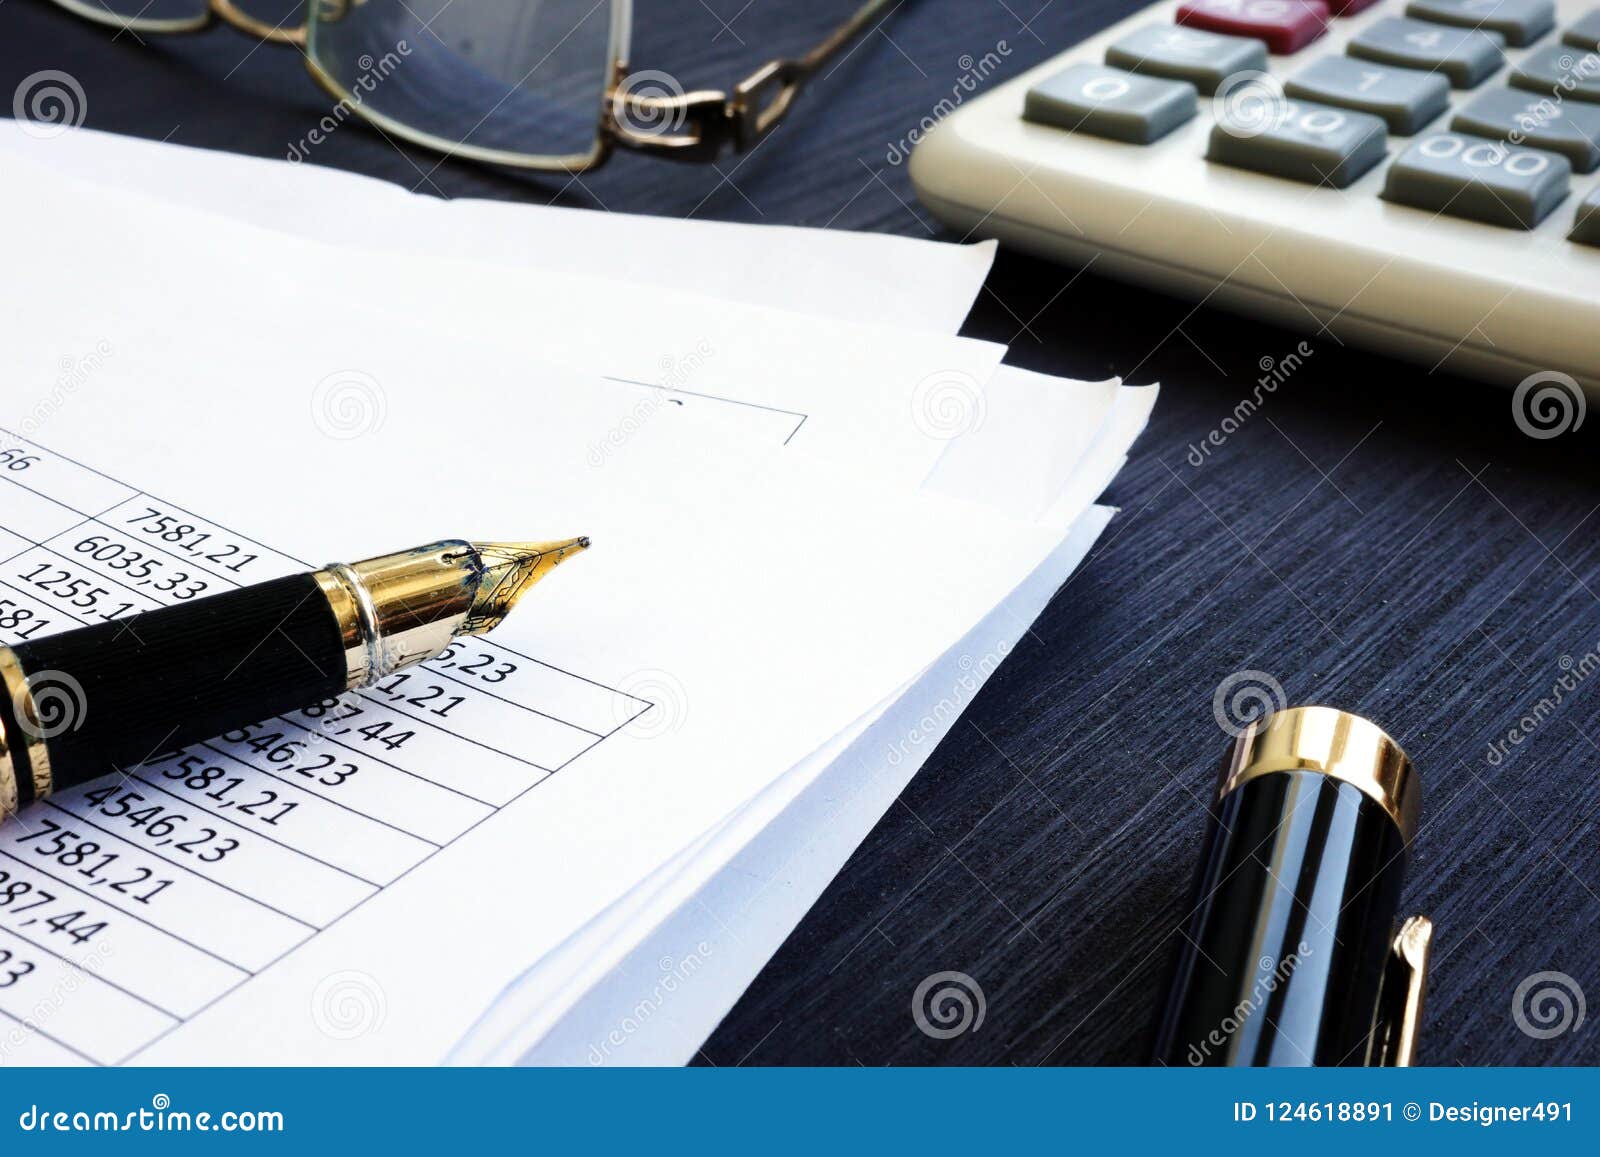 bookkeeping. financial report with figures and calculator on a desk.